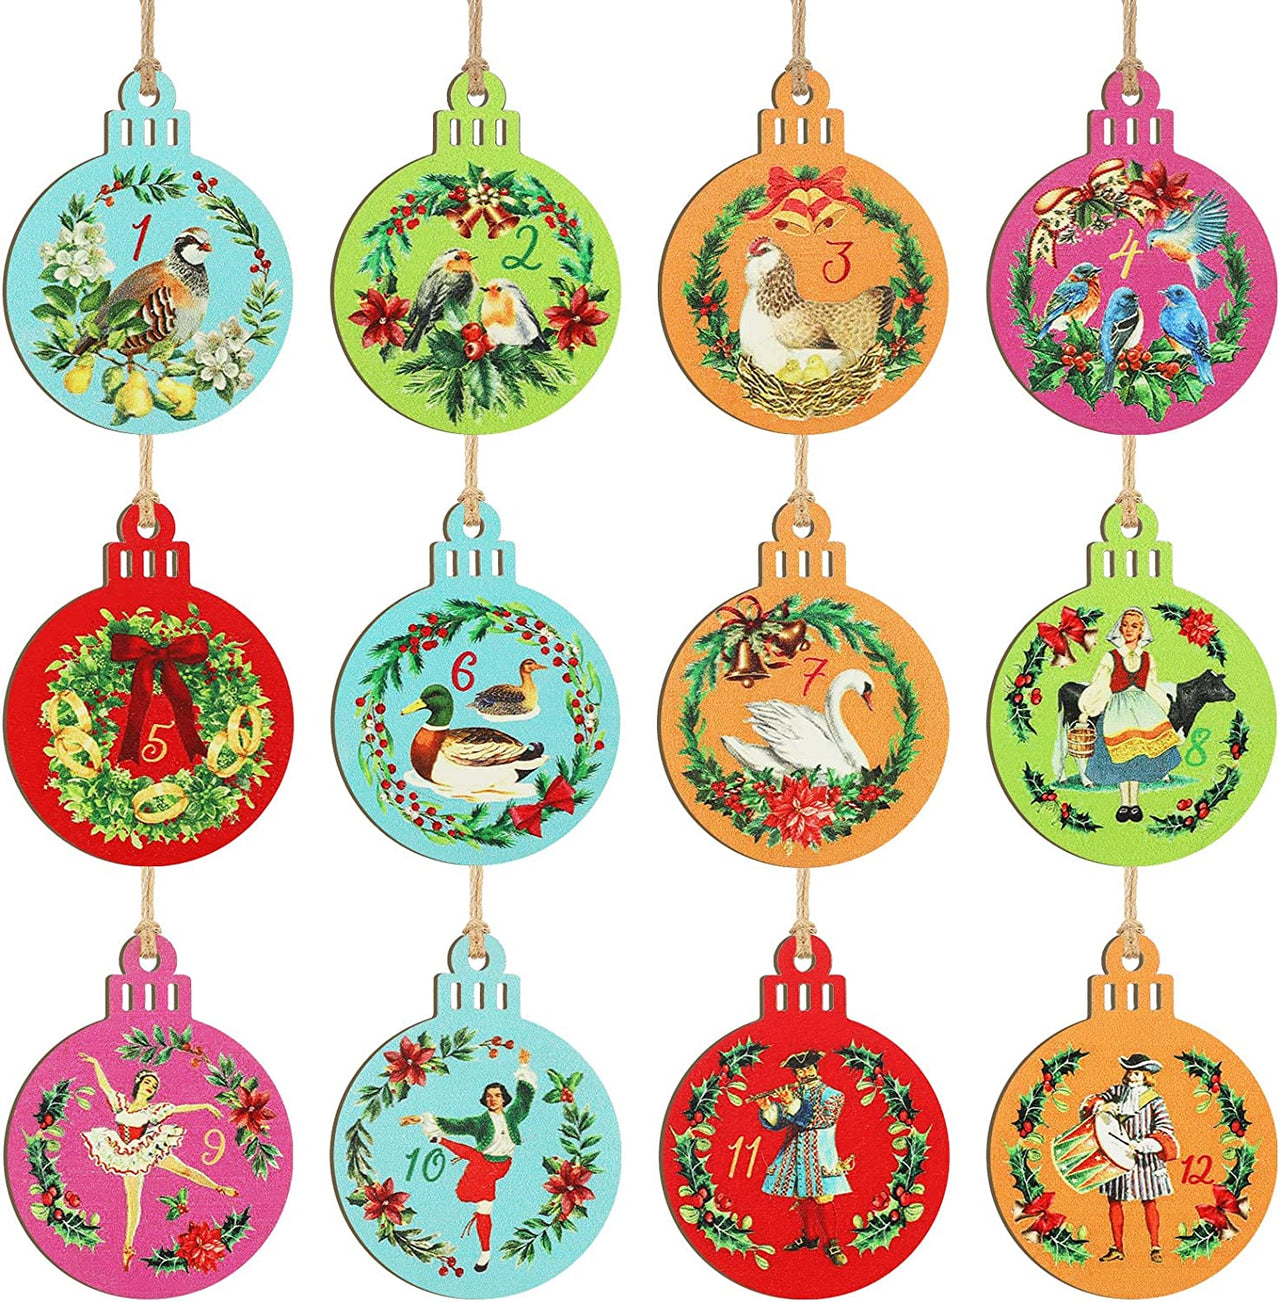 12 Pieces 12 Days of Christmas Ornaments Wooden Christmas Ornament Hanging Christmas Tree Decorations 3.15 Inches Rustic Vintage Cute Xmas Ornaments for Party Supplies Wall Decor Indoor Outdoor